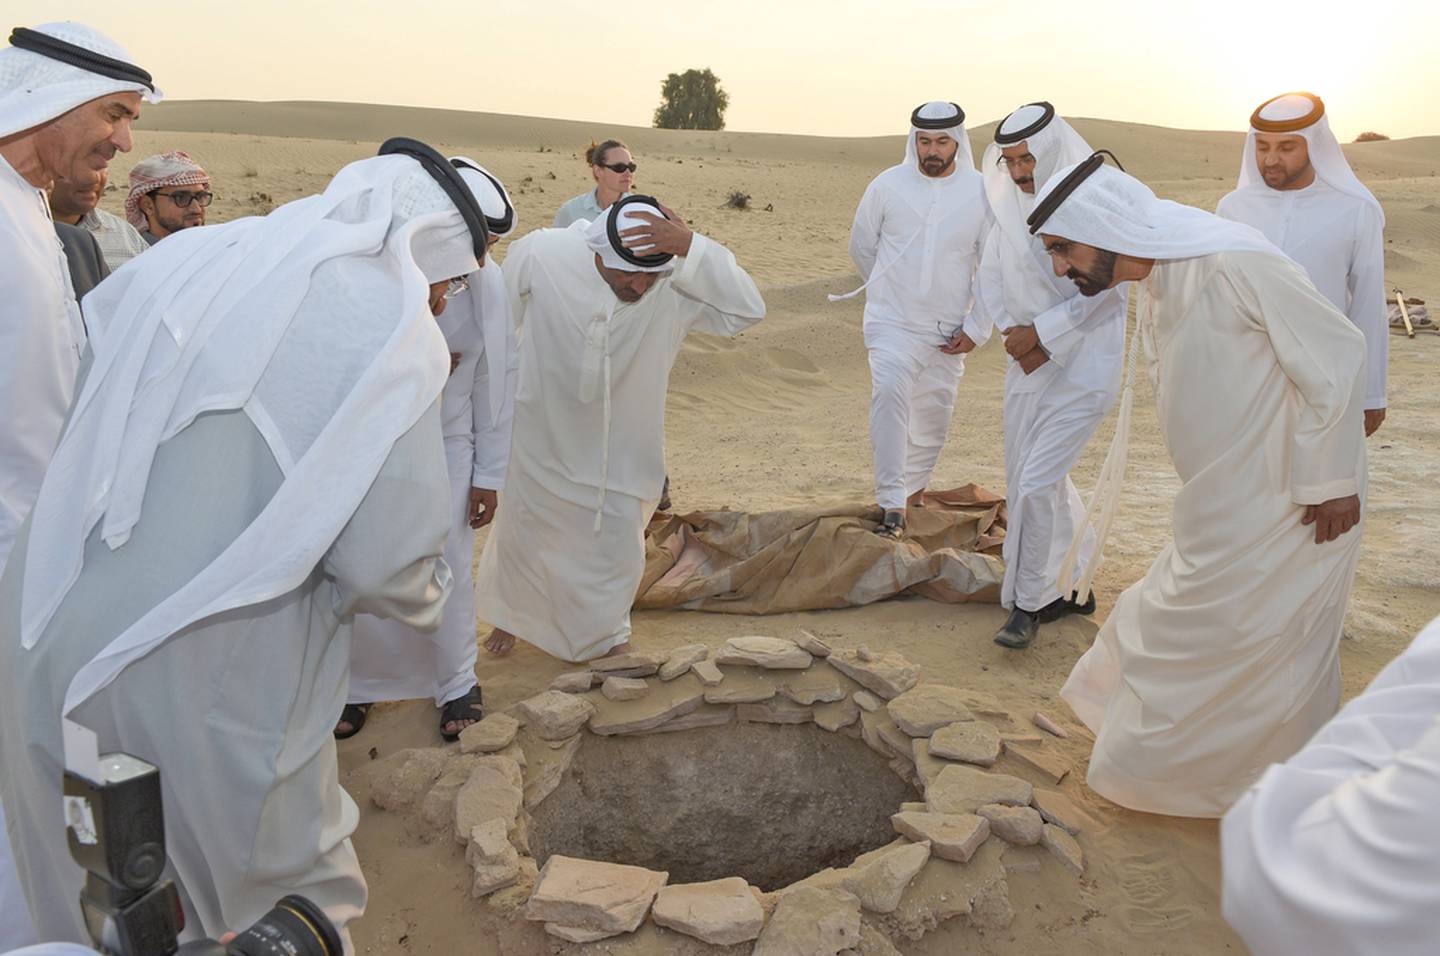 Sheikh Mohammed bin Rashid, Vice President and Ruler of Dubai, inspects the excavations at Saruq Al Hadid, which he sighted from a helicopter in 2002. Wam